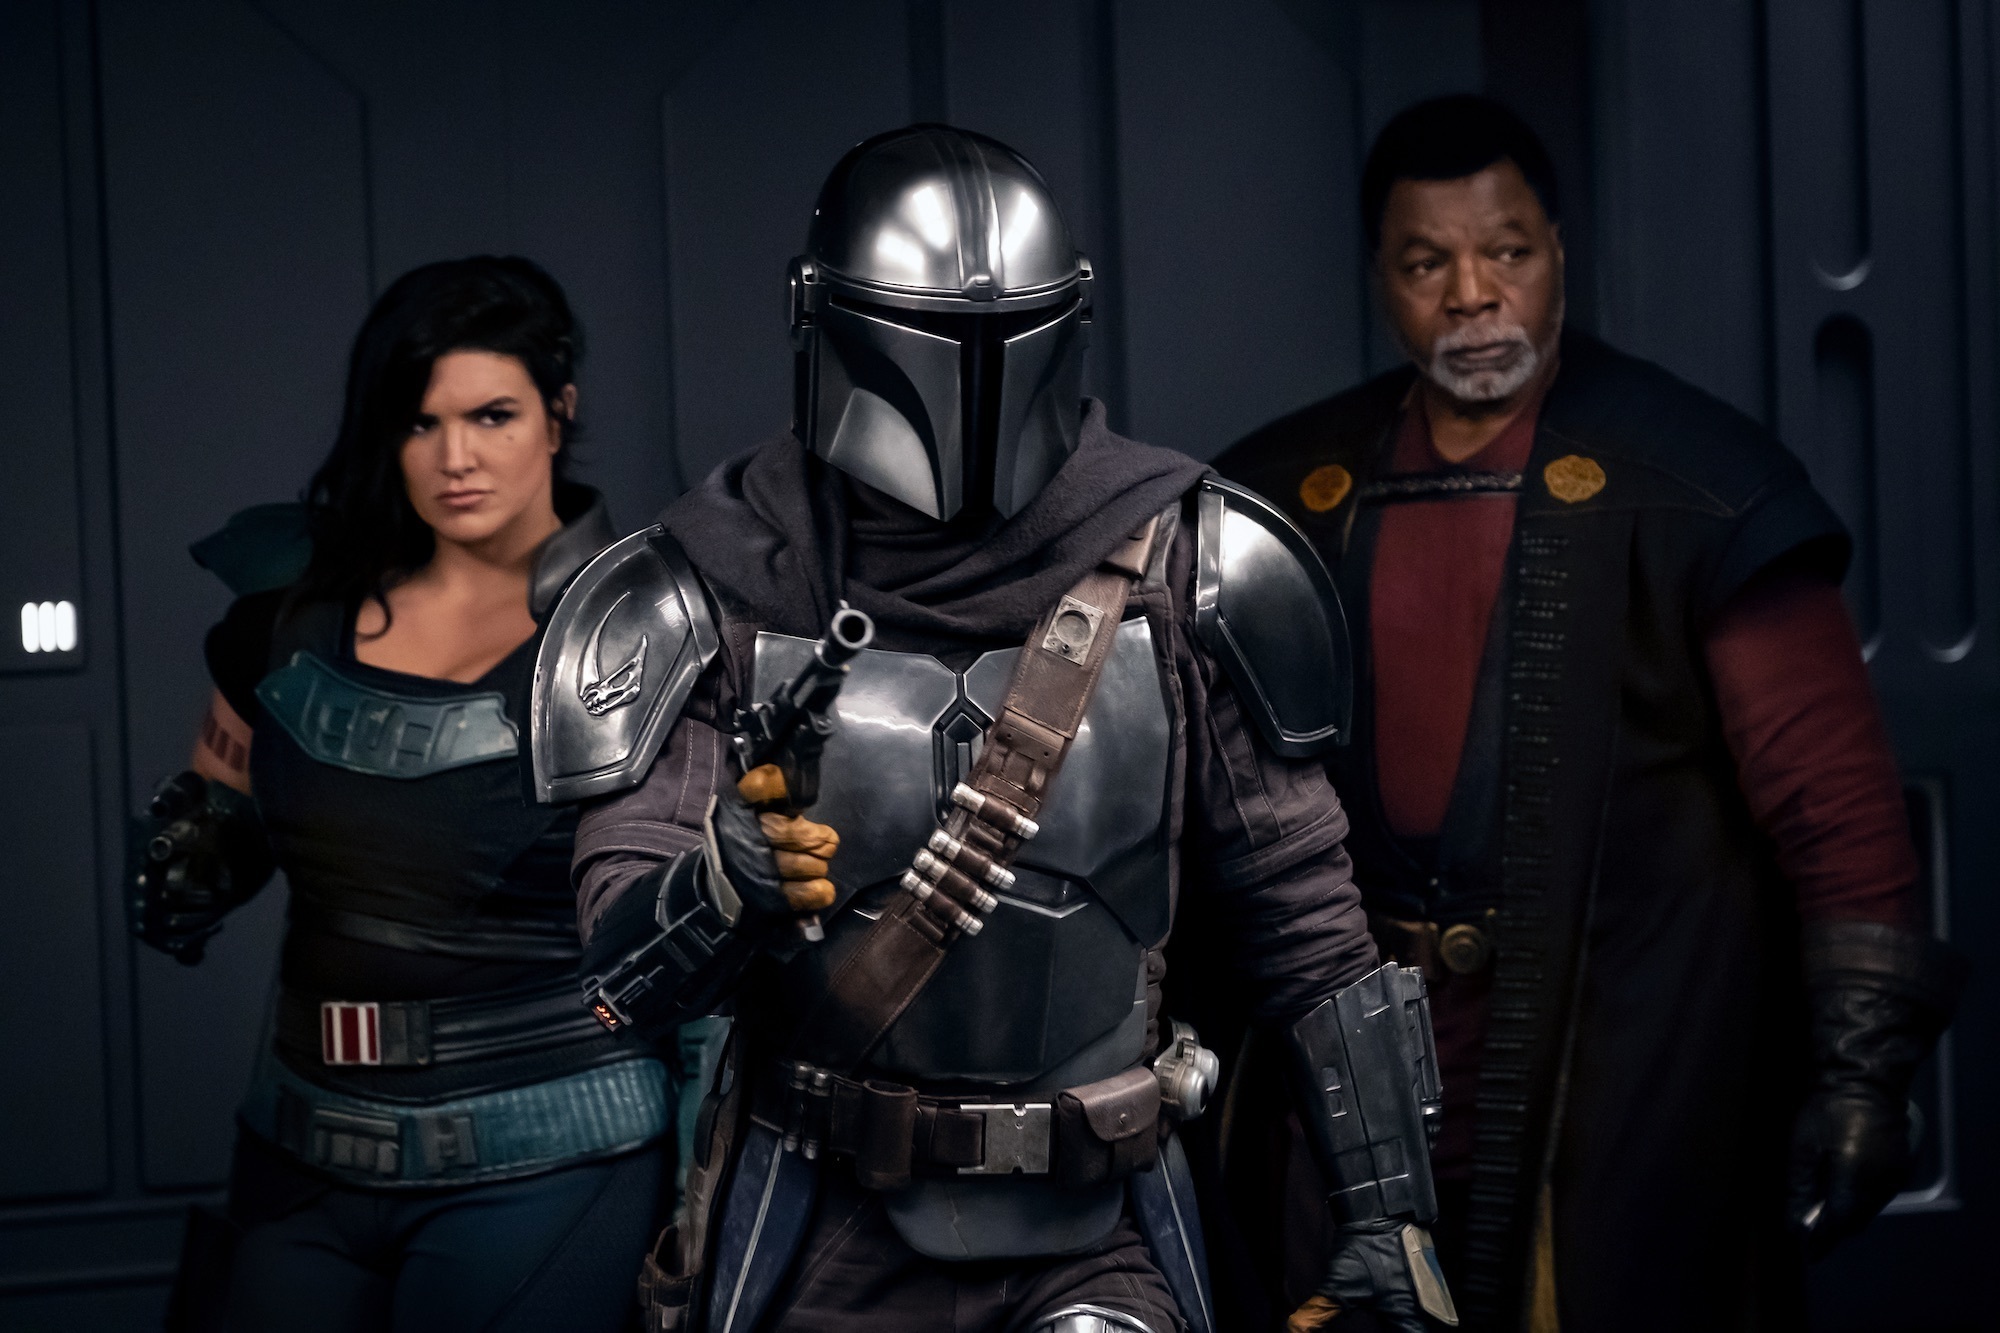 Check Out the Brand Spankin’ New Trailer for The Mandalorian Season 2!